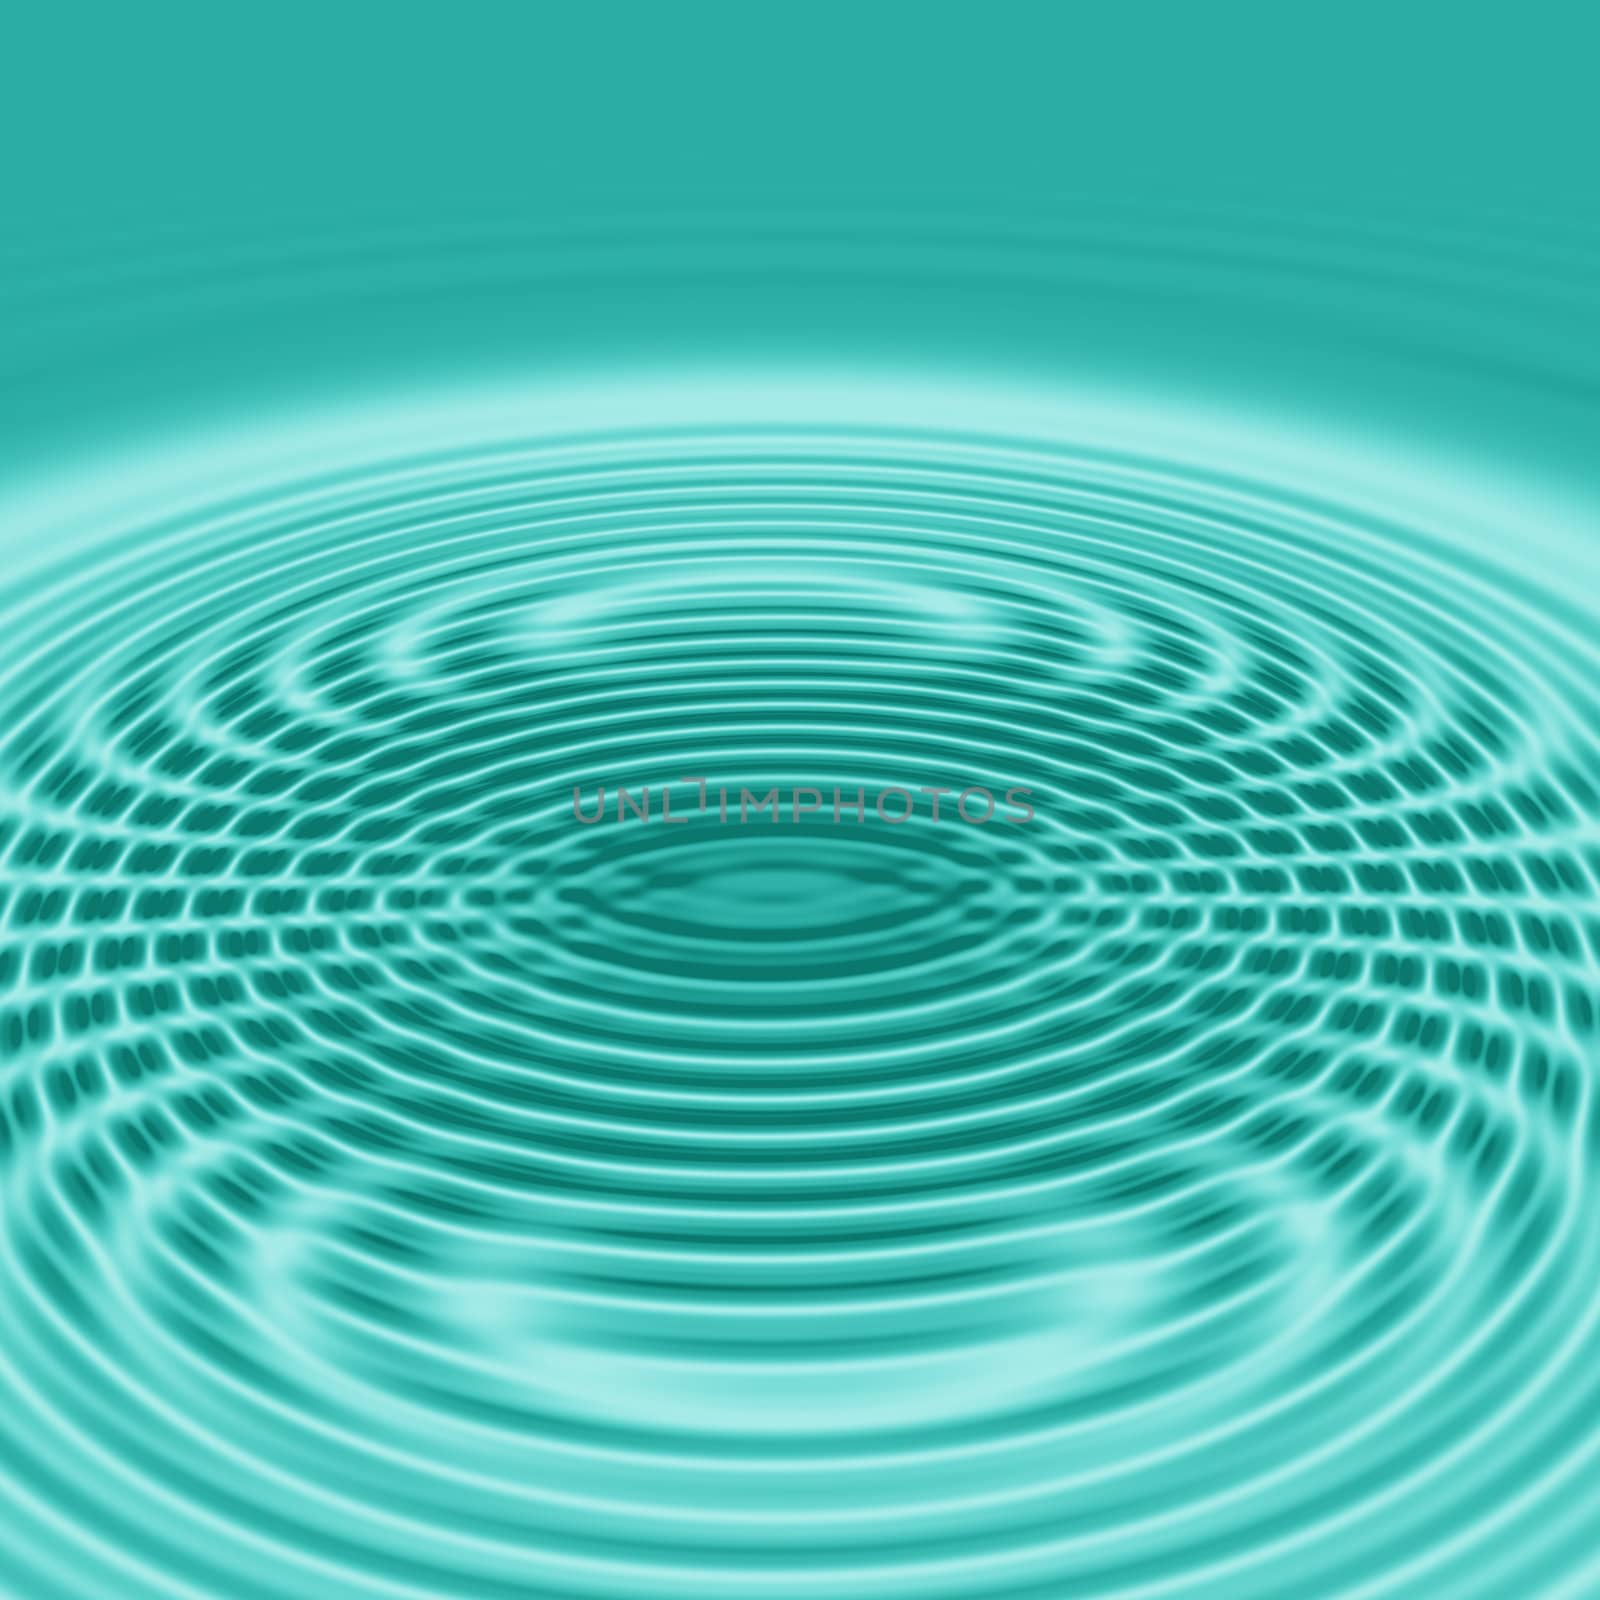 interference ripples by hospitalera